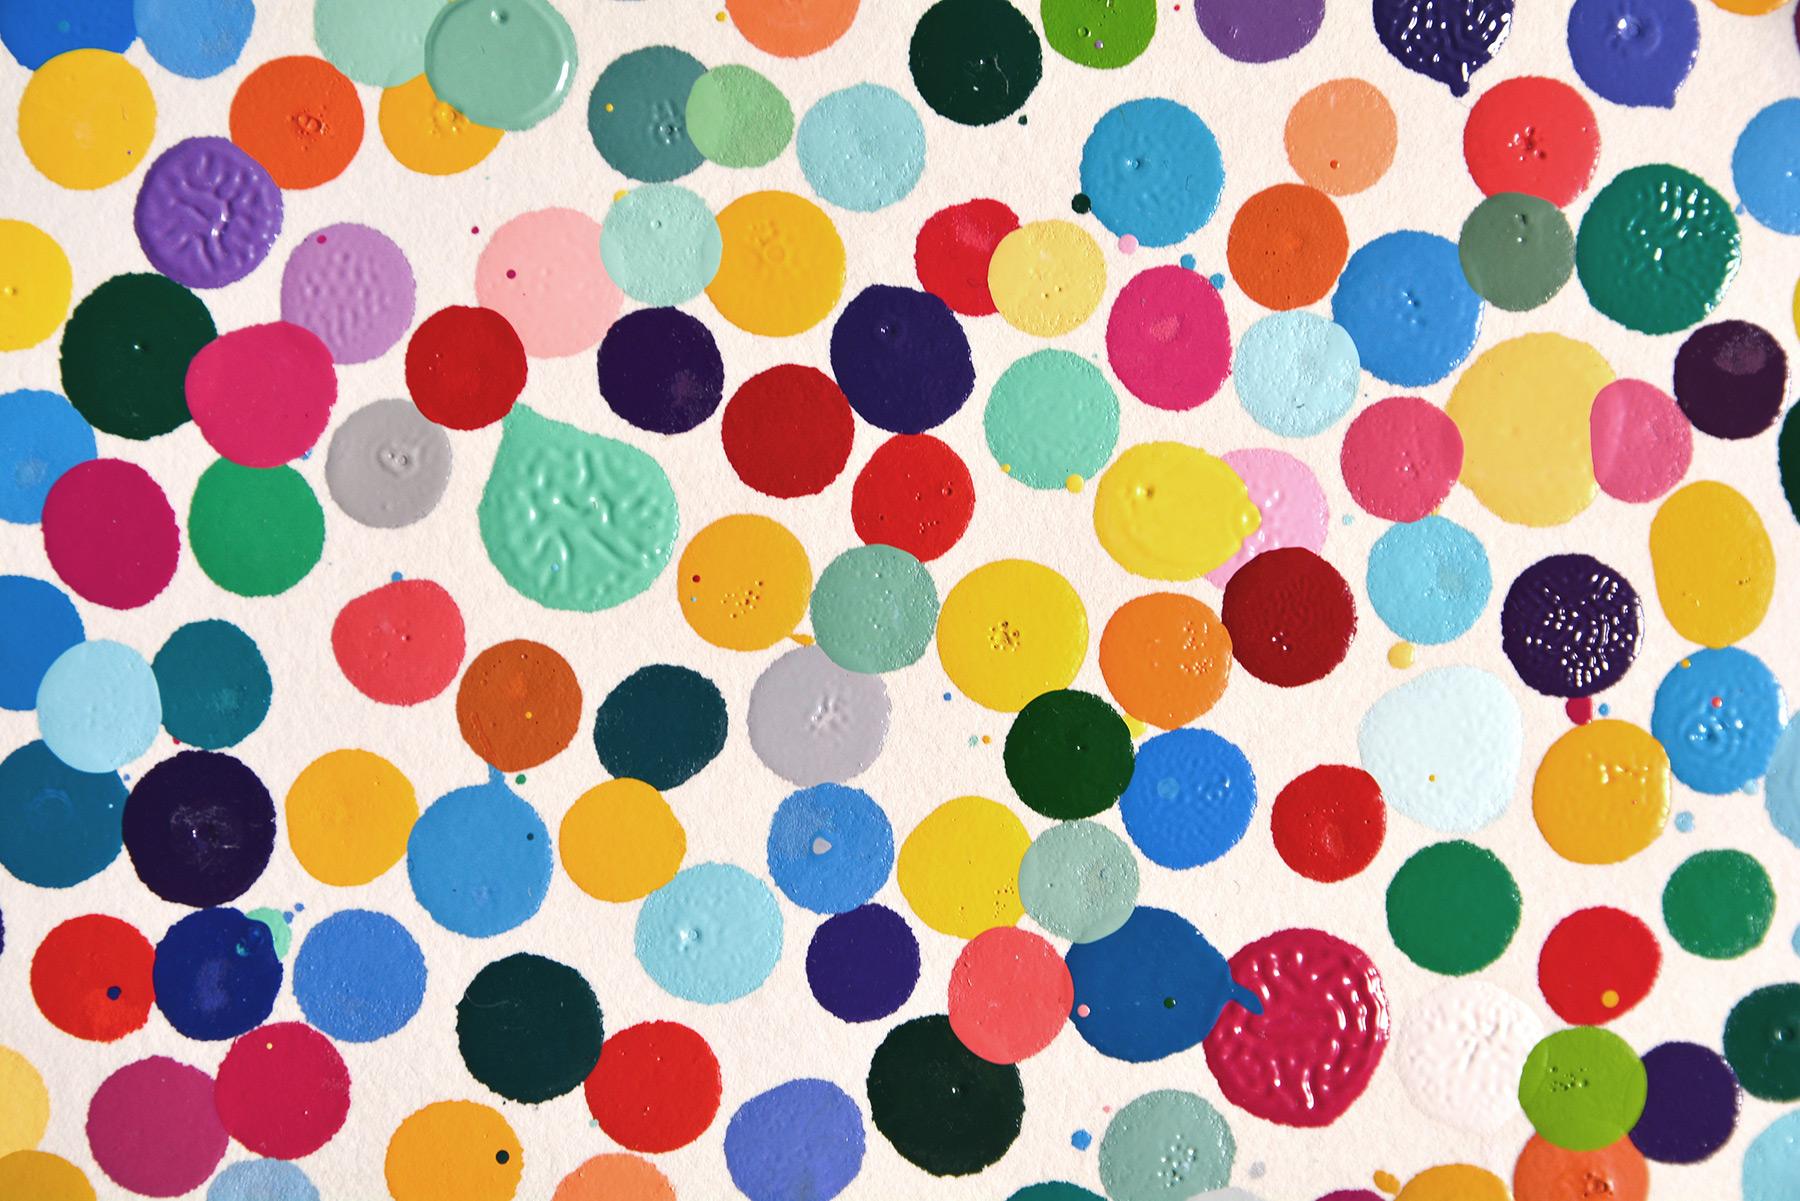 DAMIEN HIRST - THE CURRENCY. Original work The Currency Project. Dots. Colors 1